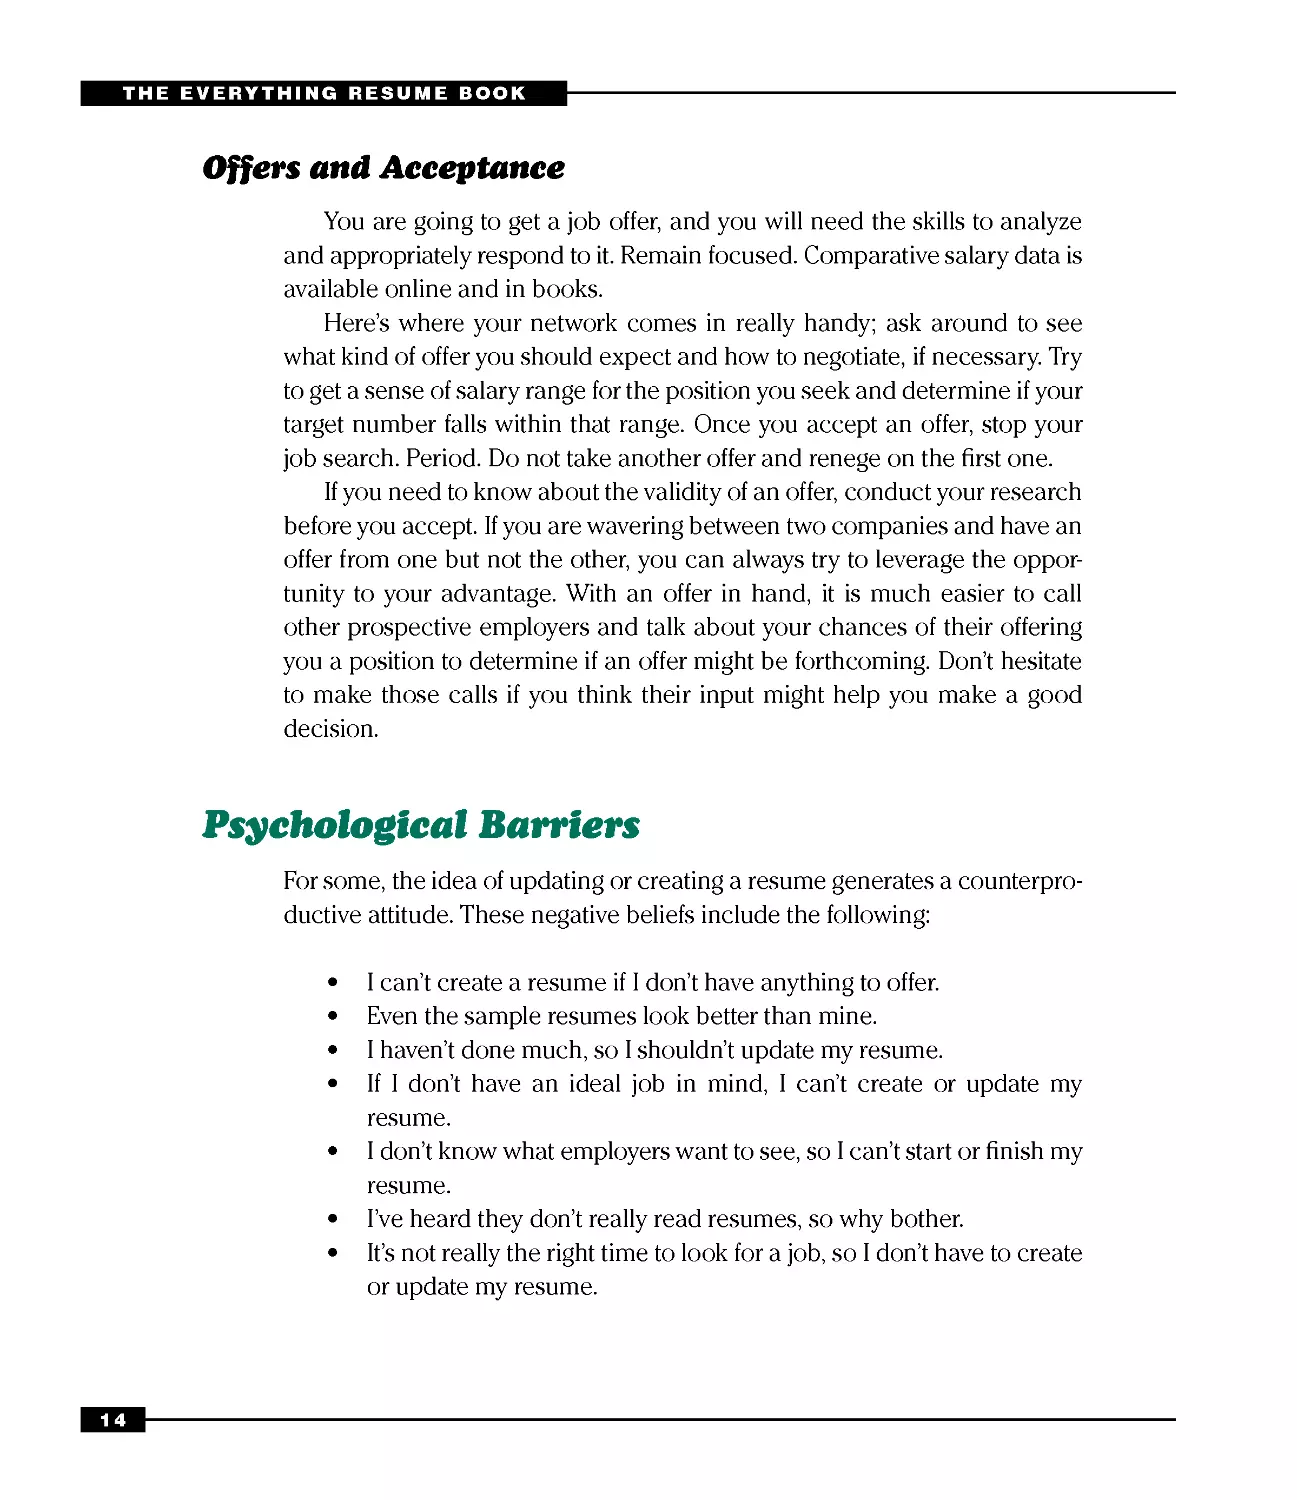 Psychological Barriers